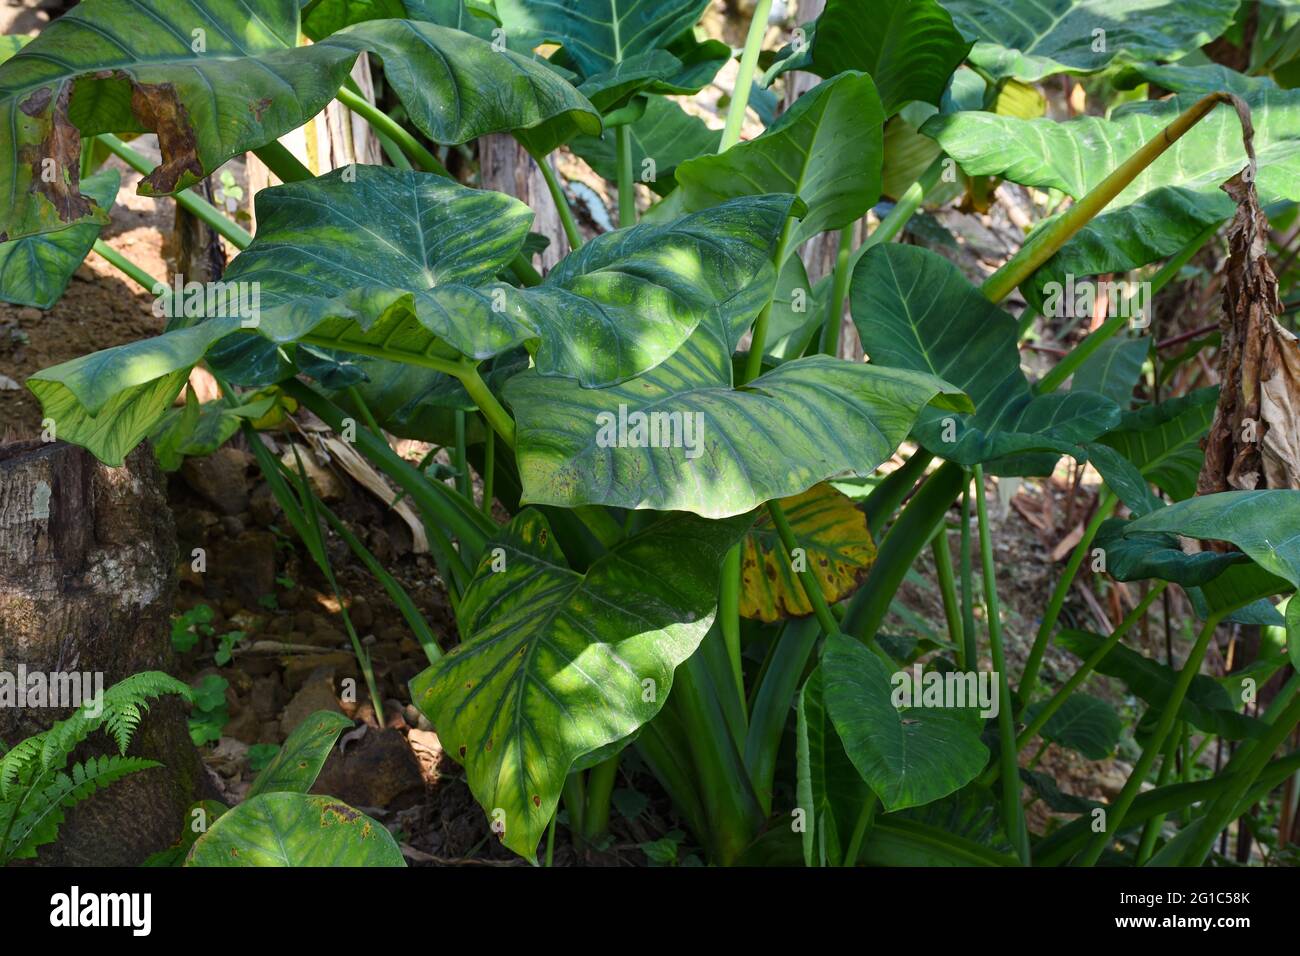 Alocasia clypeolata commonly known as Elephant Ears, a decorative Alocasia with contrasting leaves. Stock Photo